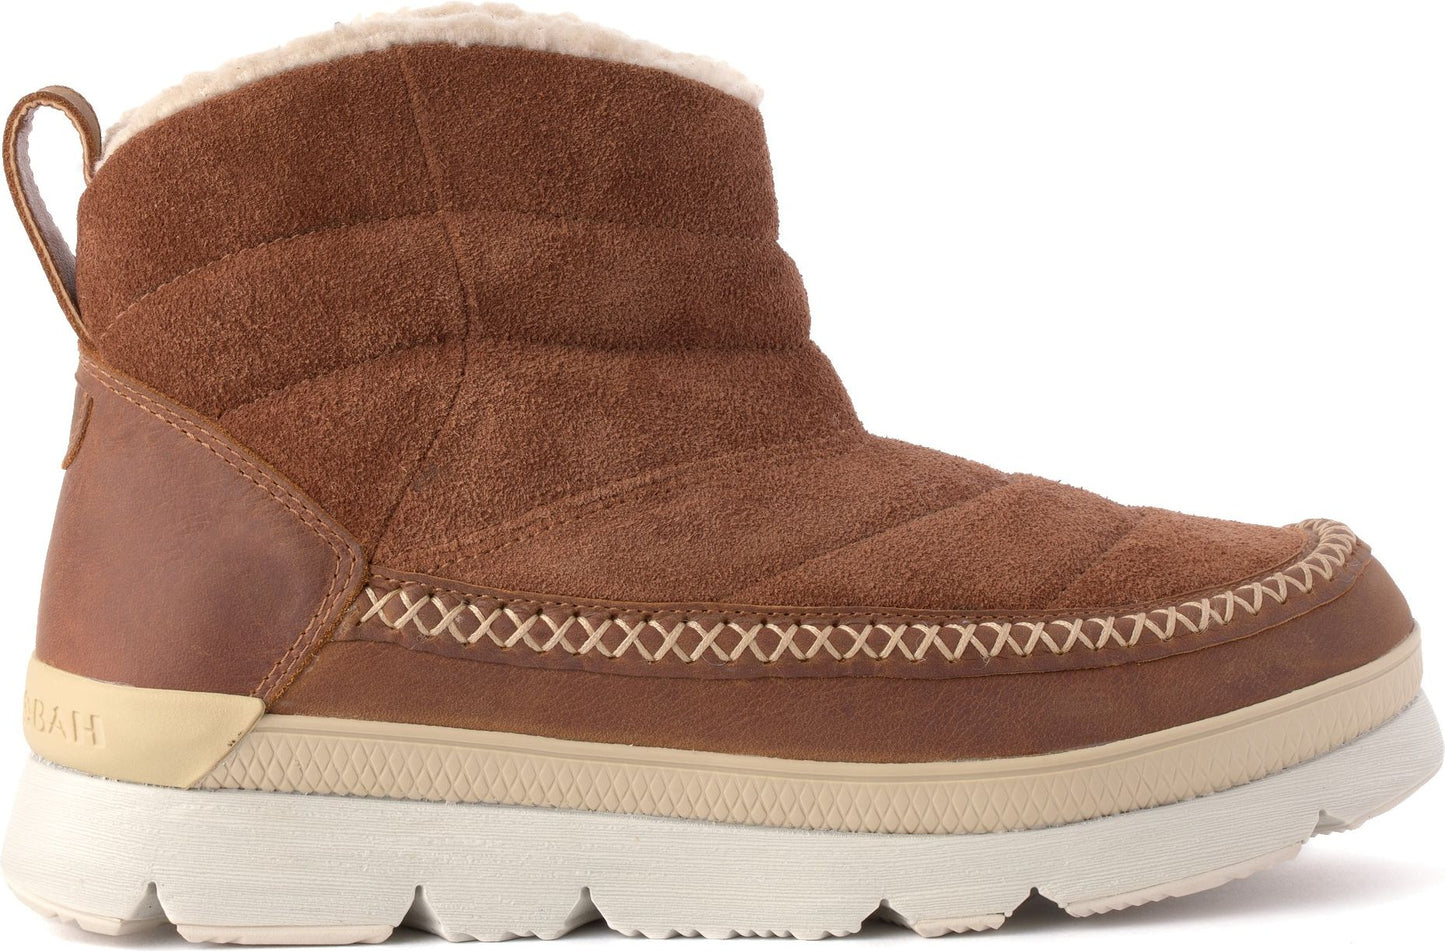 Manitobah Mukluks Boots Pacific Insulated Oak